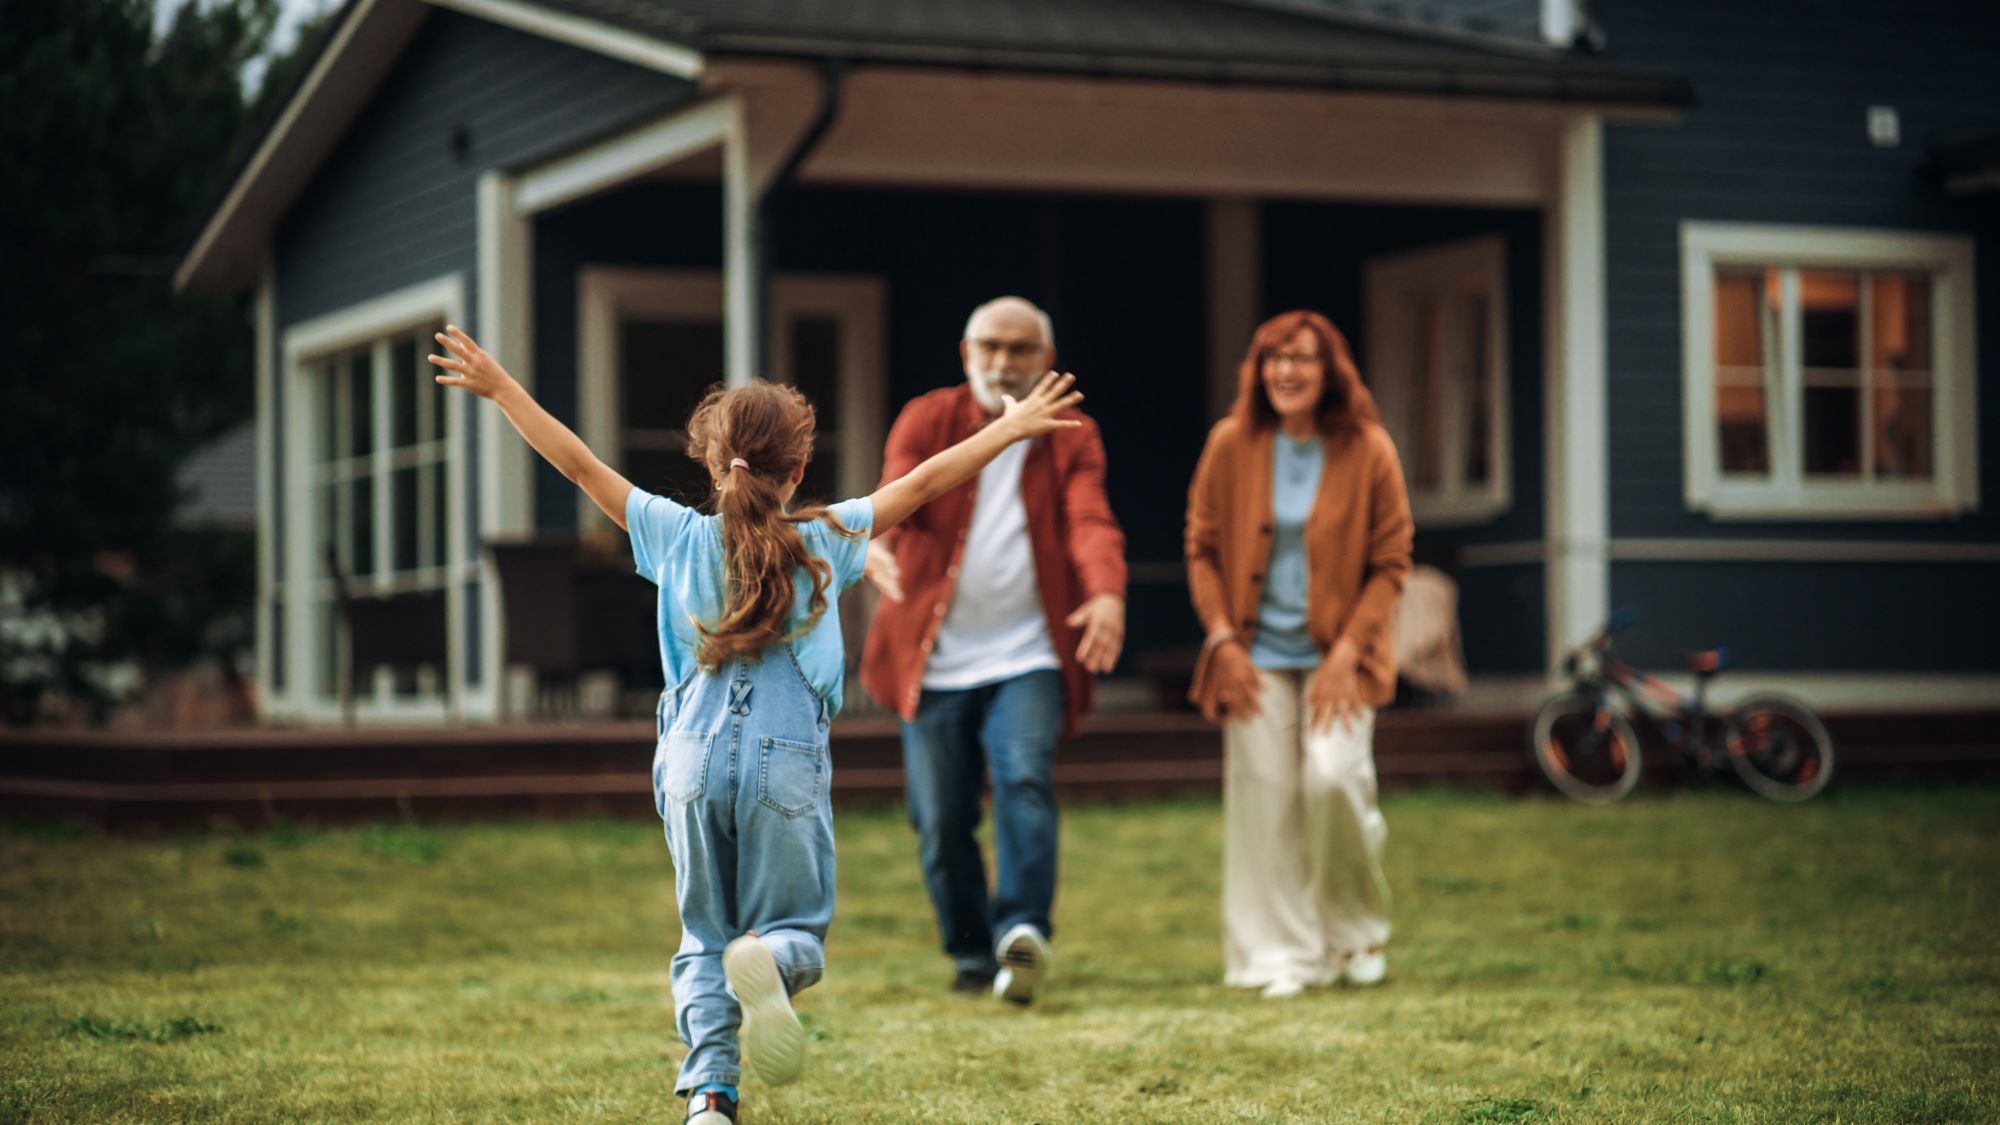 grandparent's house, grandchild running excitedly to grandma and grandpa with arms wide open